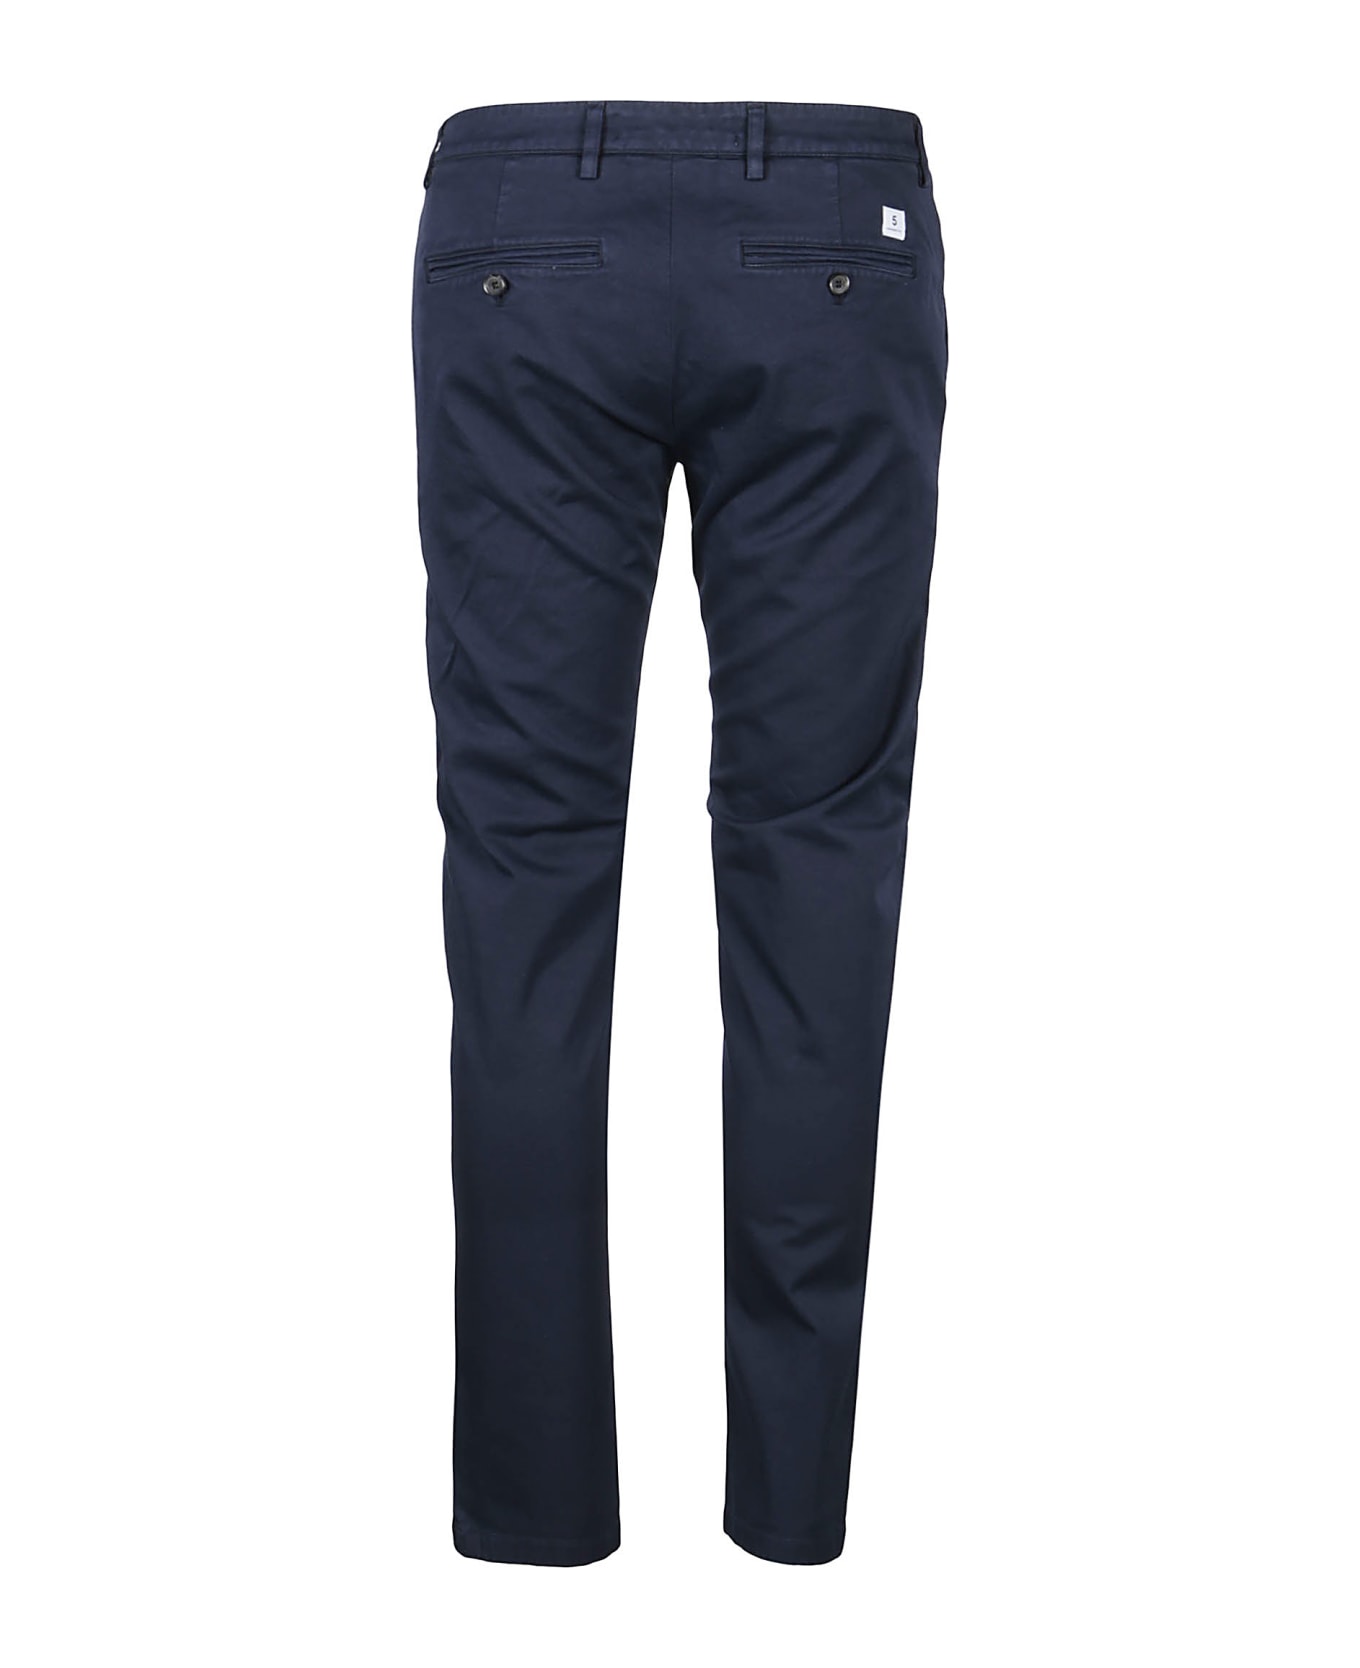 Department Five Mike Pant - Navy ボトムス